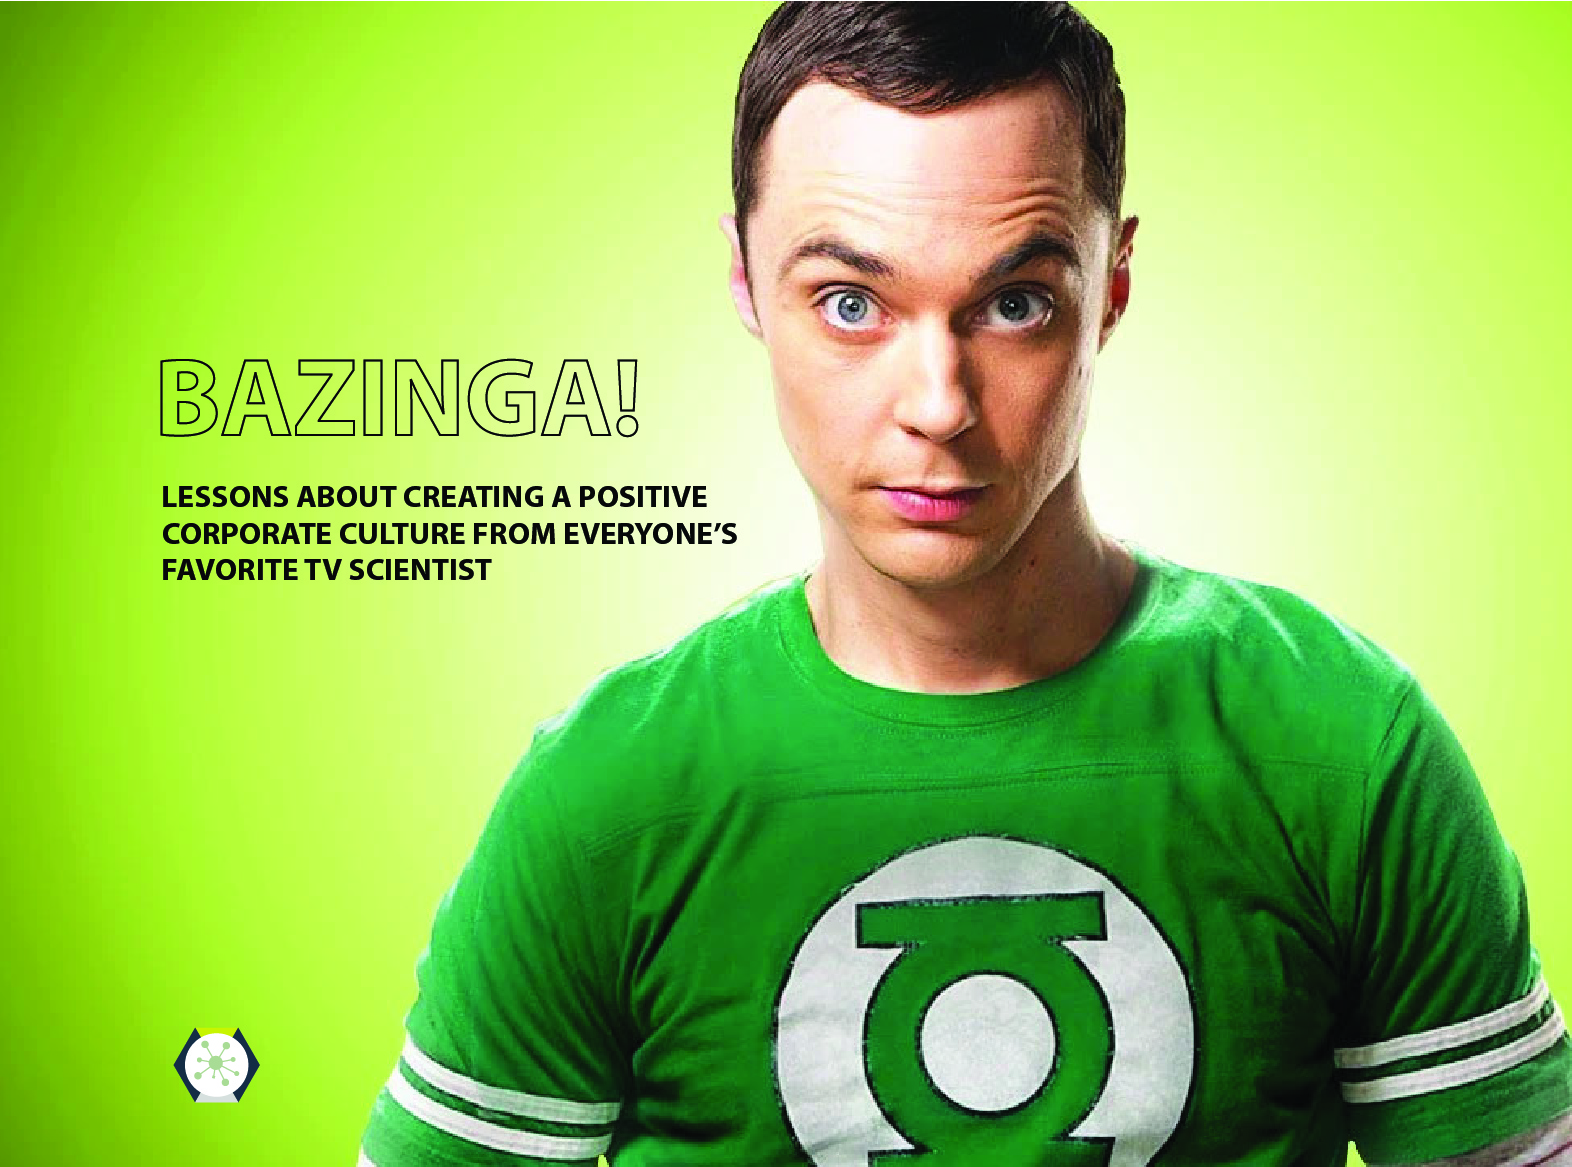 BAZINGA! Lessons About Creating a Positive Corporate Culture From Everyone’s Favorite TV Scientist